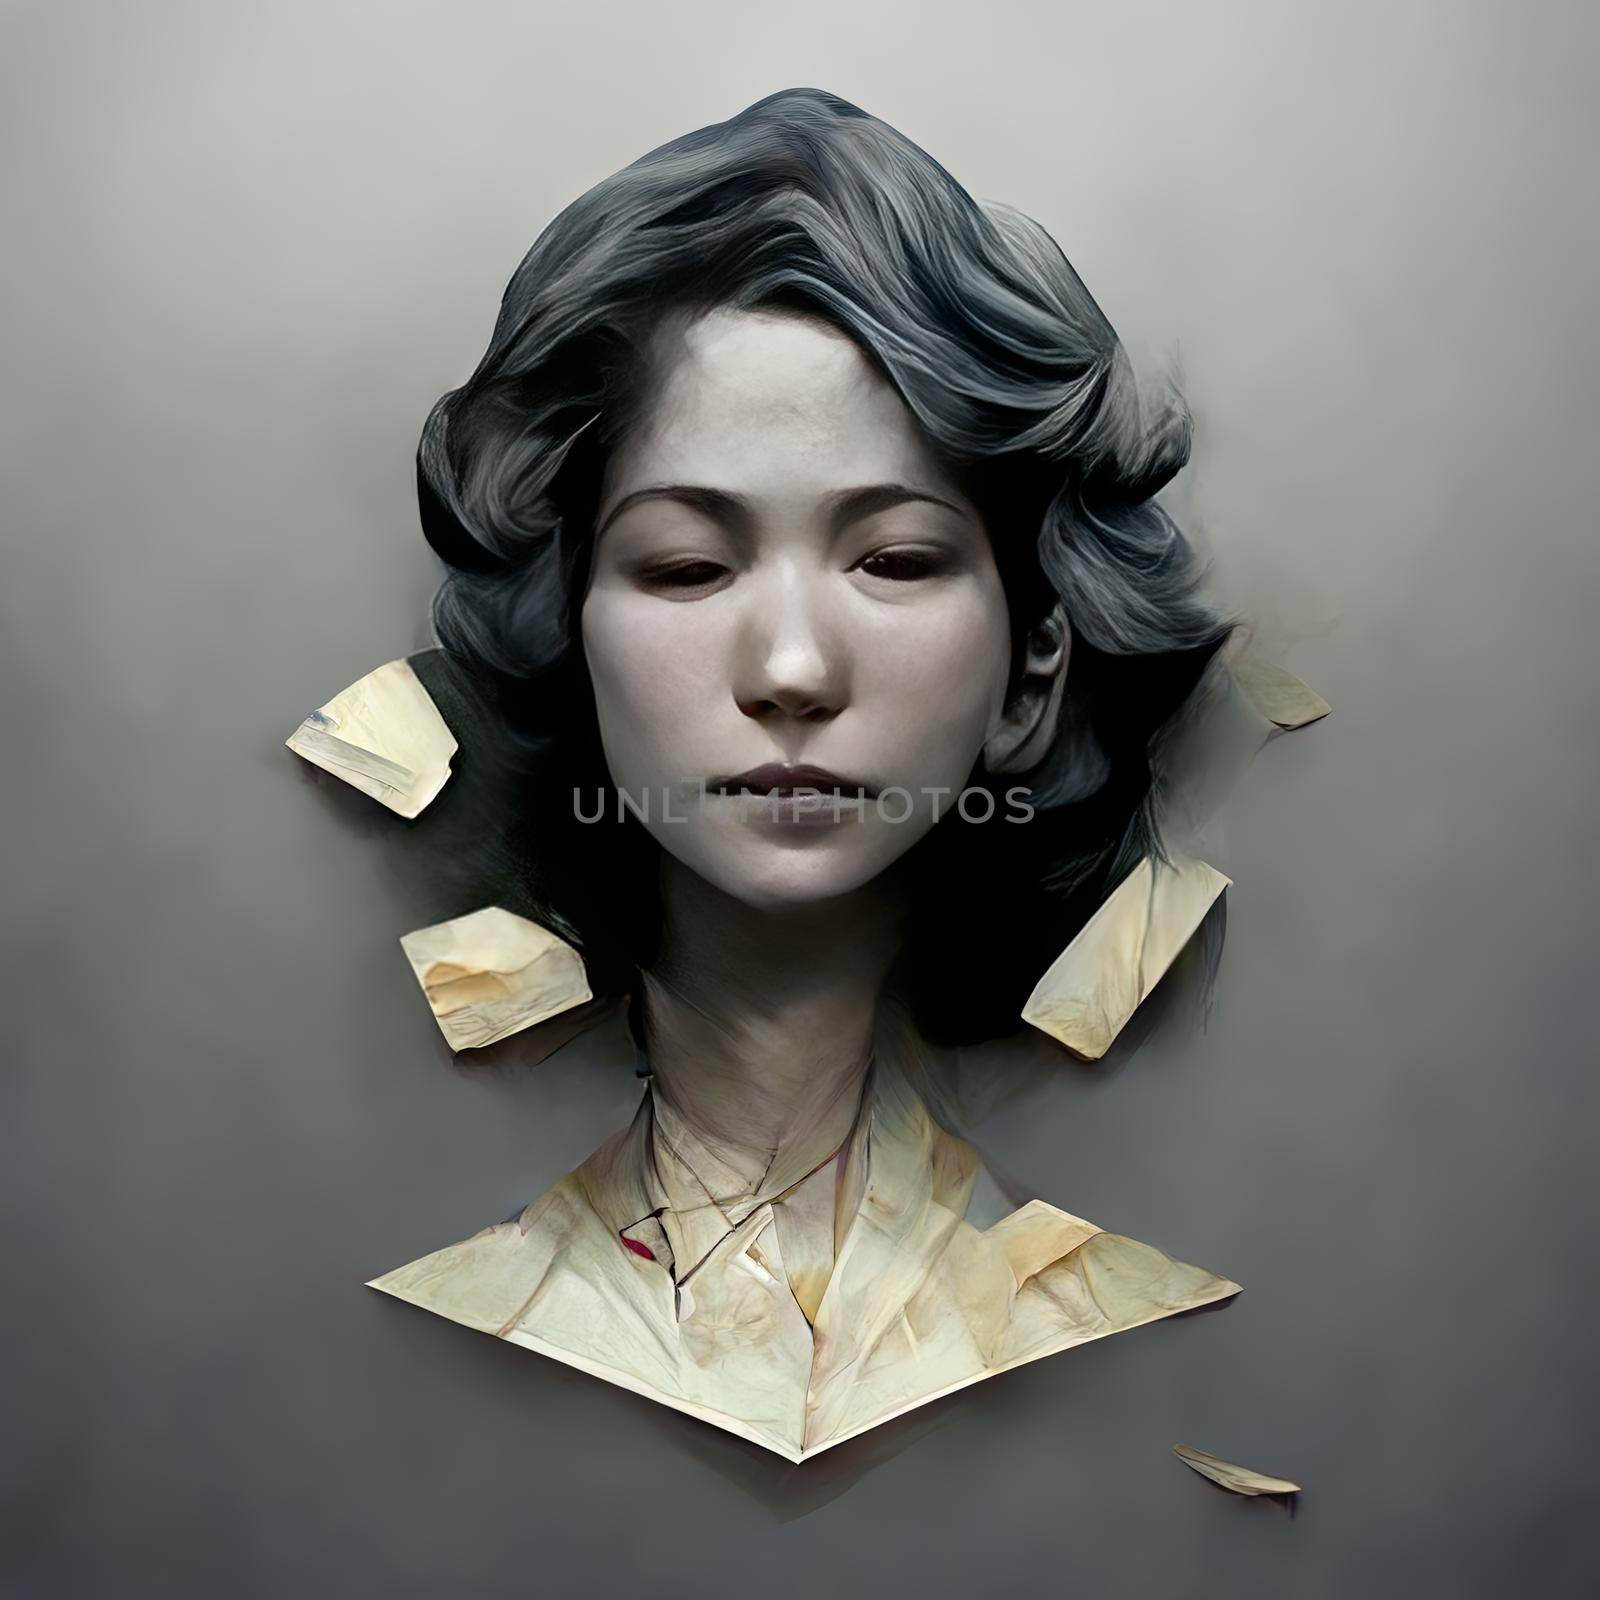 Three dimensional render of woman disintegrating into tiny pieces. High quality 3d illustration